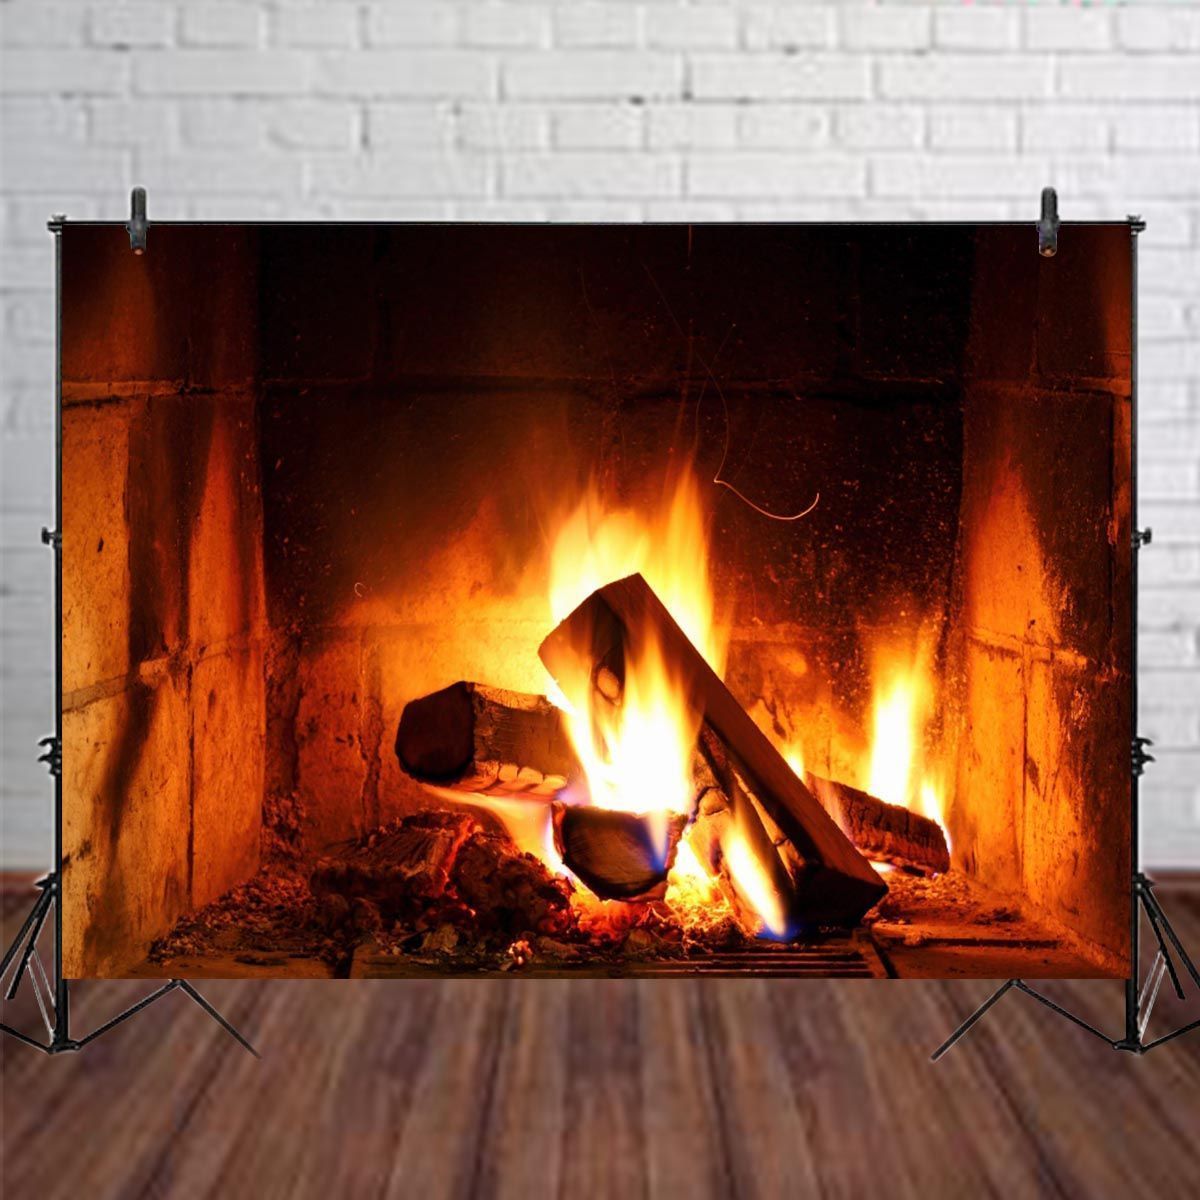 2x1FT-3x2FT-Fireplace-Fire-Wood-Photography-Backdrop-Background-Studio-Prop-1636953